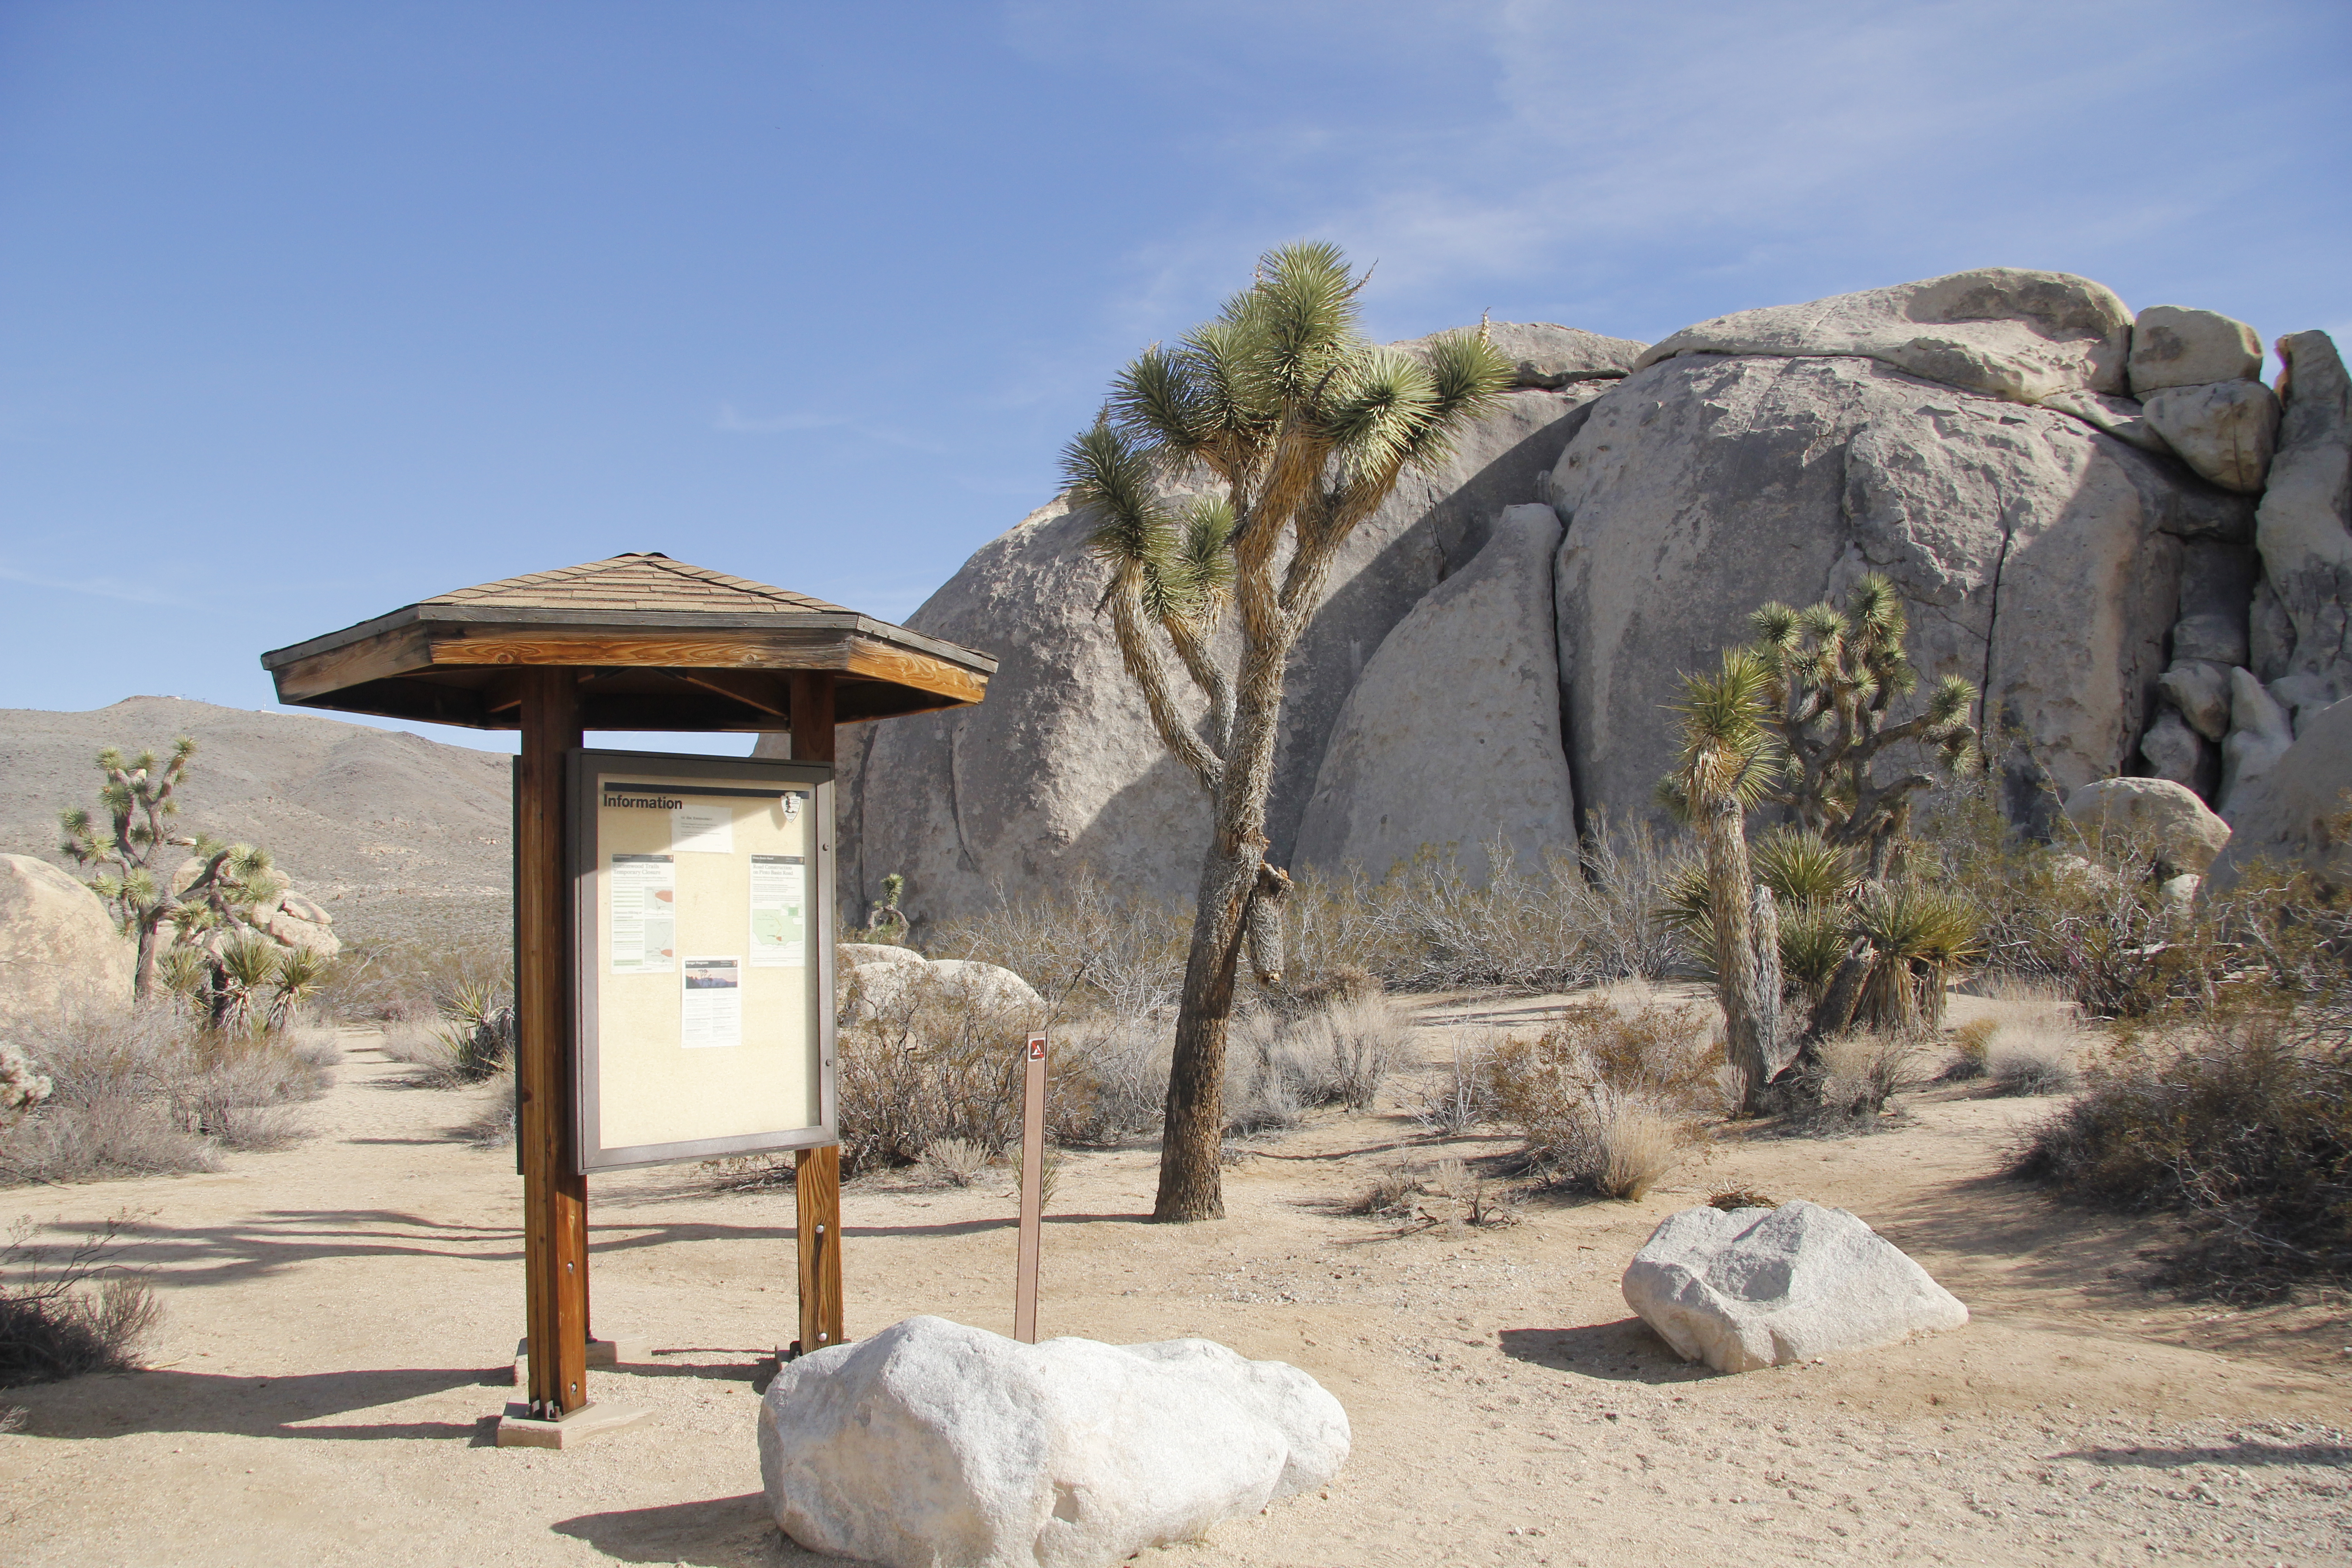 Belle Campground information board is shown in front of a trail and a Joshua tree.